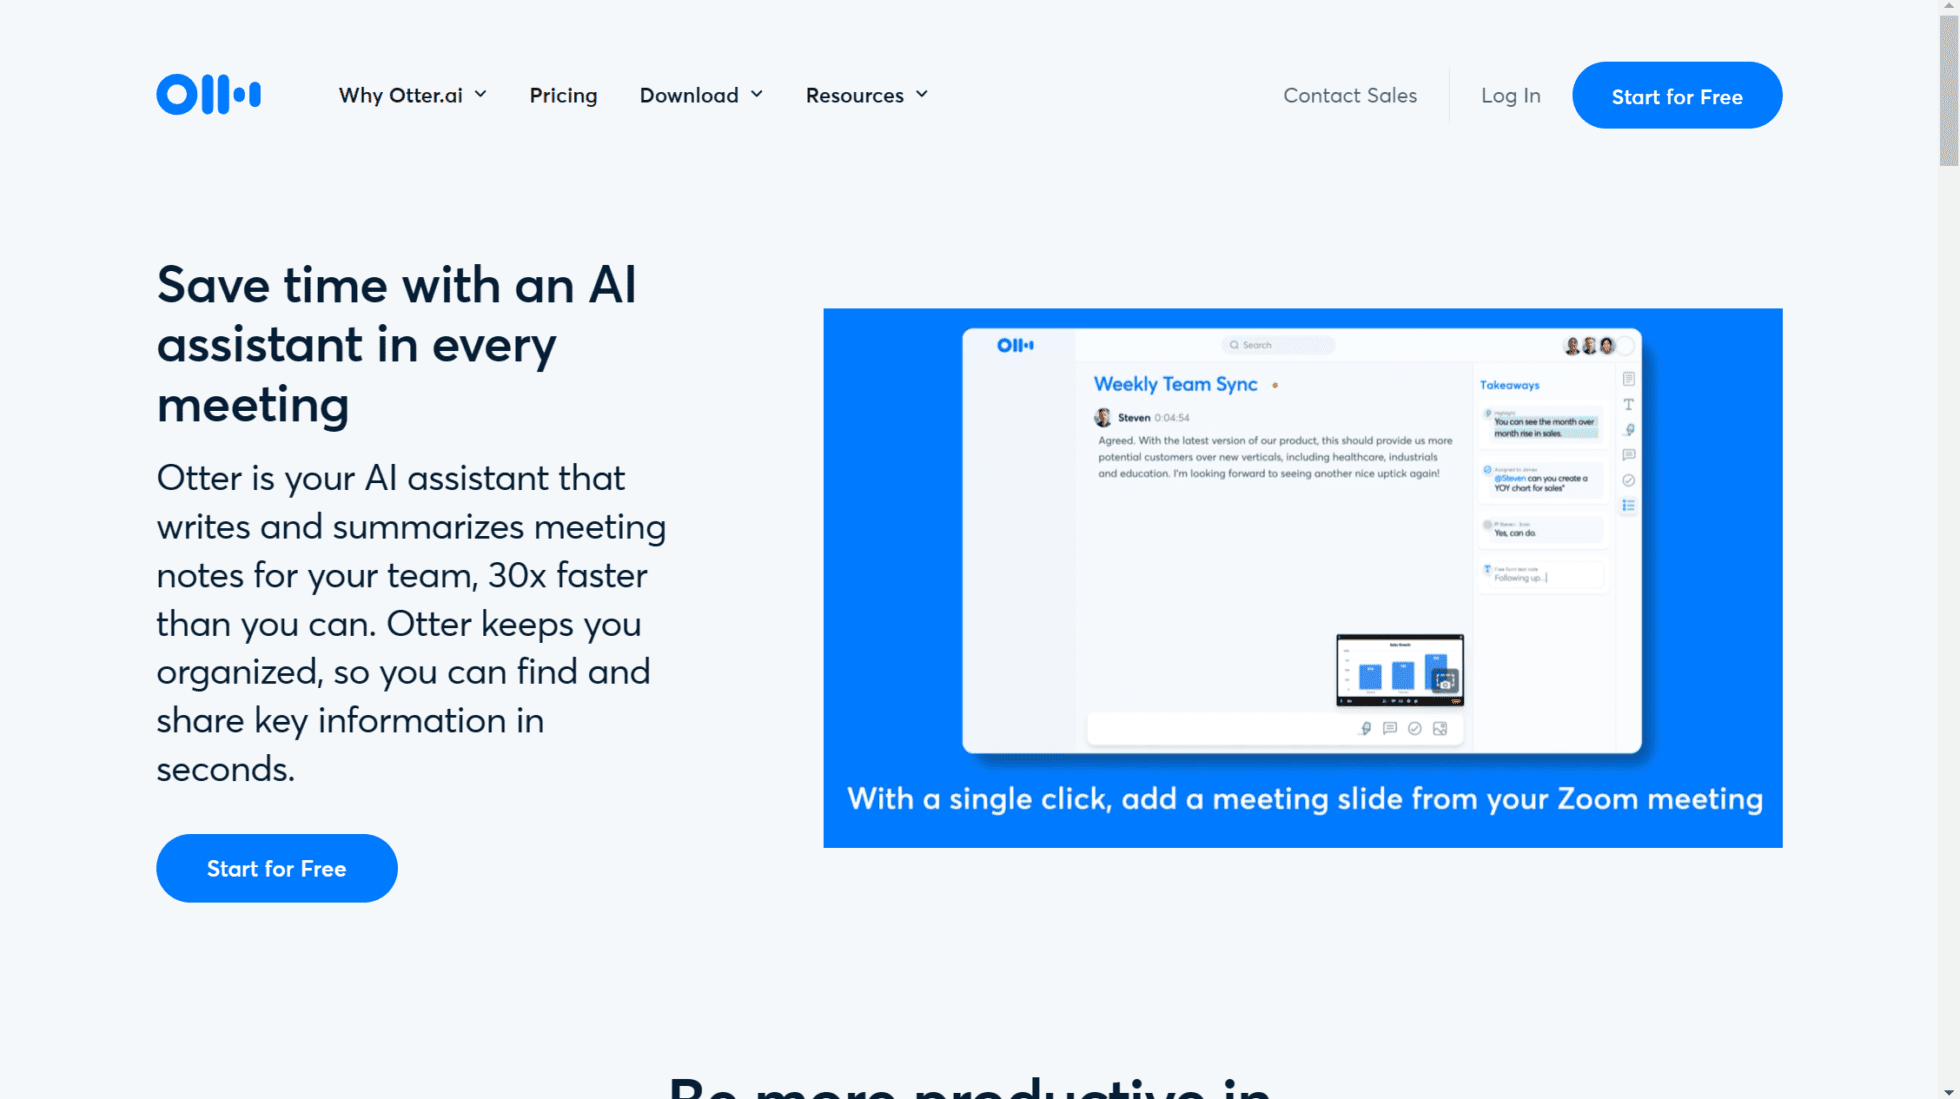 Otter.ai's updated AI-themed homepage